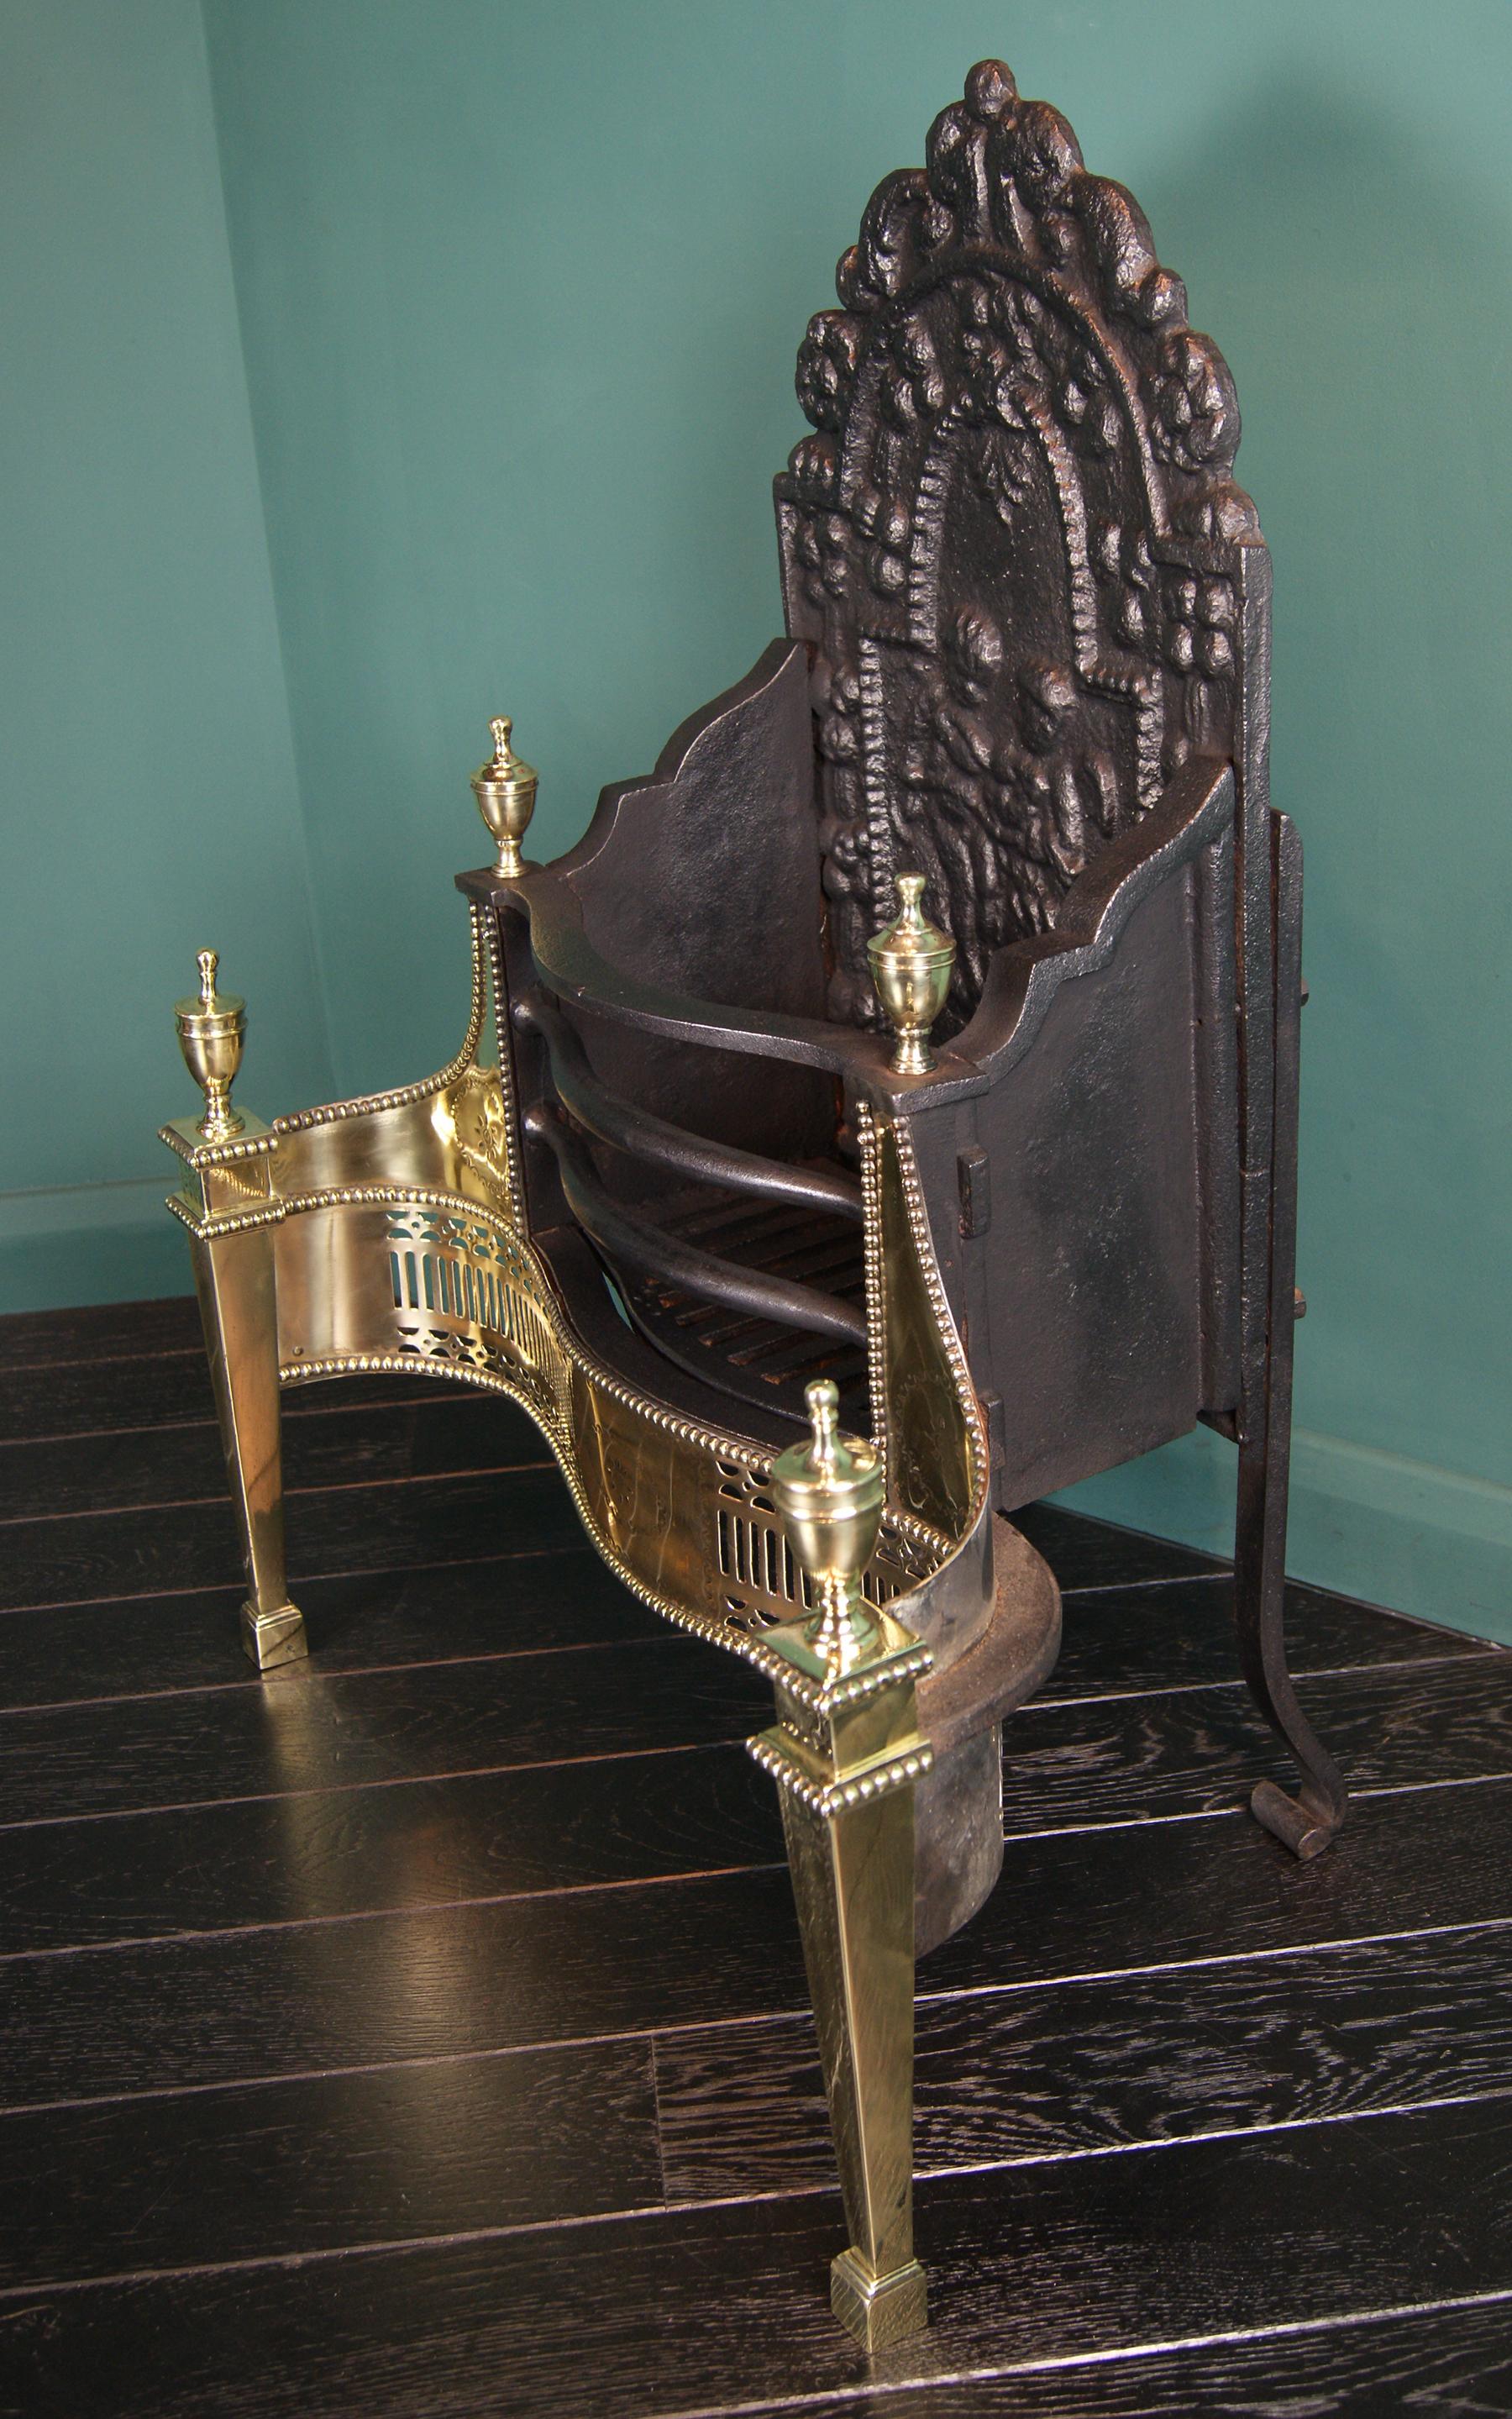 A brass, wrought & cast iron fire grate in the Adam manner by Thomas Elsley. The railed serpentine basket above a polished brass pierced fret centered by an engraved tablet, set between tapering engraved legs, with urn finials. Decorative fireback